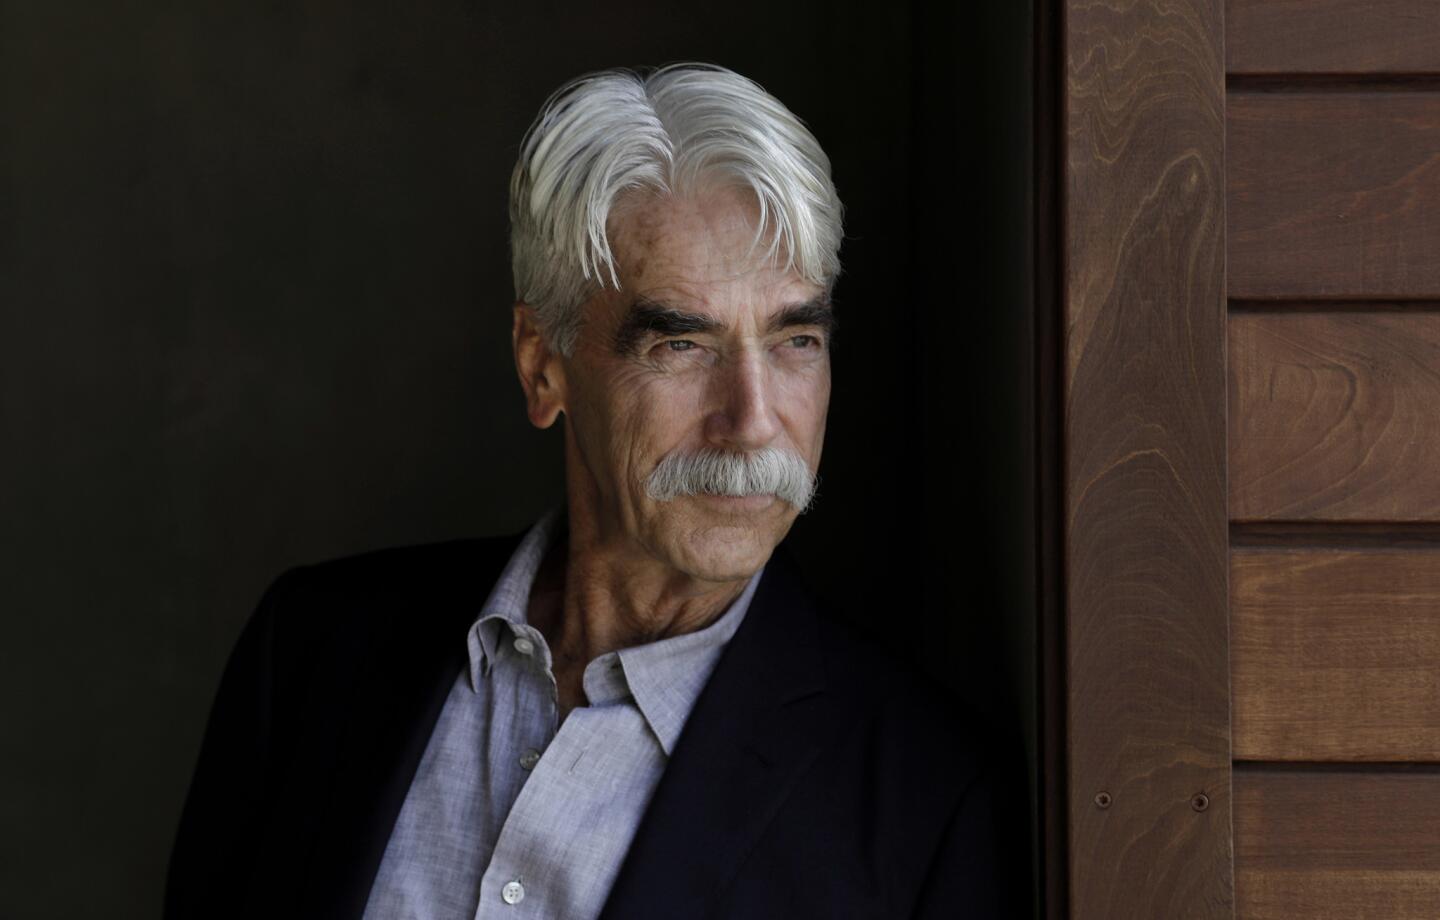 A steadily employed actor since the late 1960s, Sam Elliott collects his first Oscar nomination as Bradley Cooper’s brother in the actor-director’s breakout hit. Elliott also earned a SAG nomination for the performance.